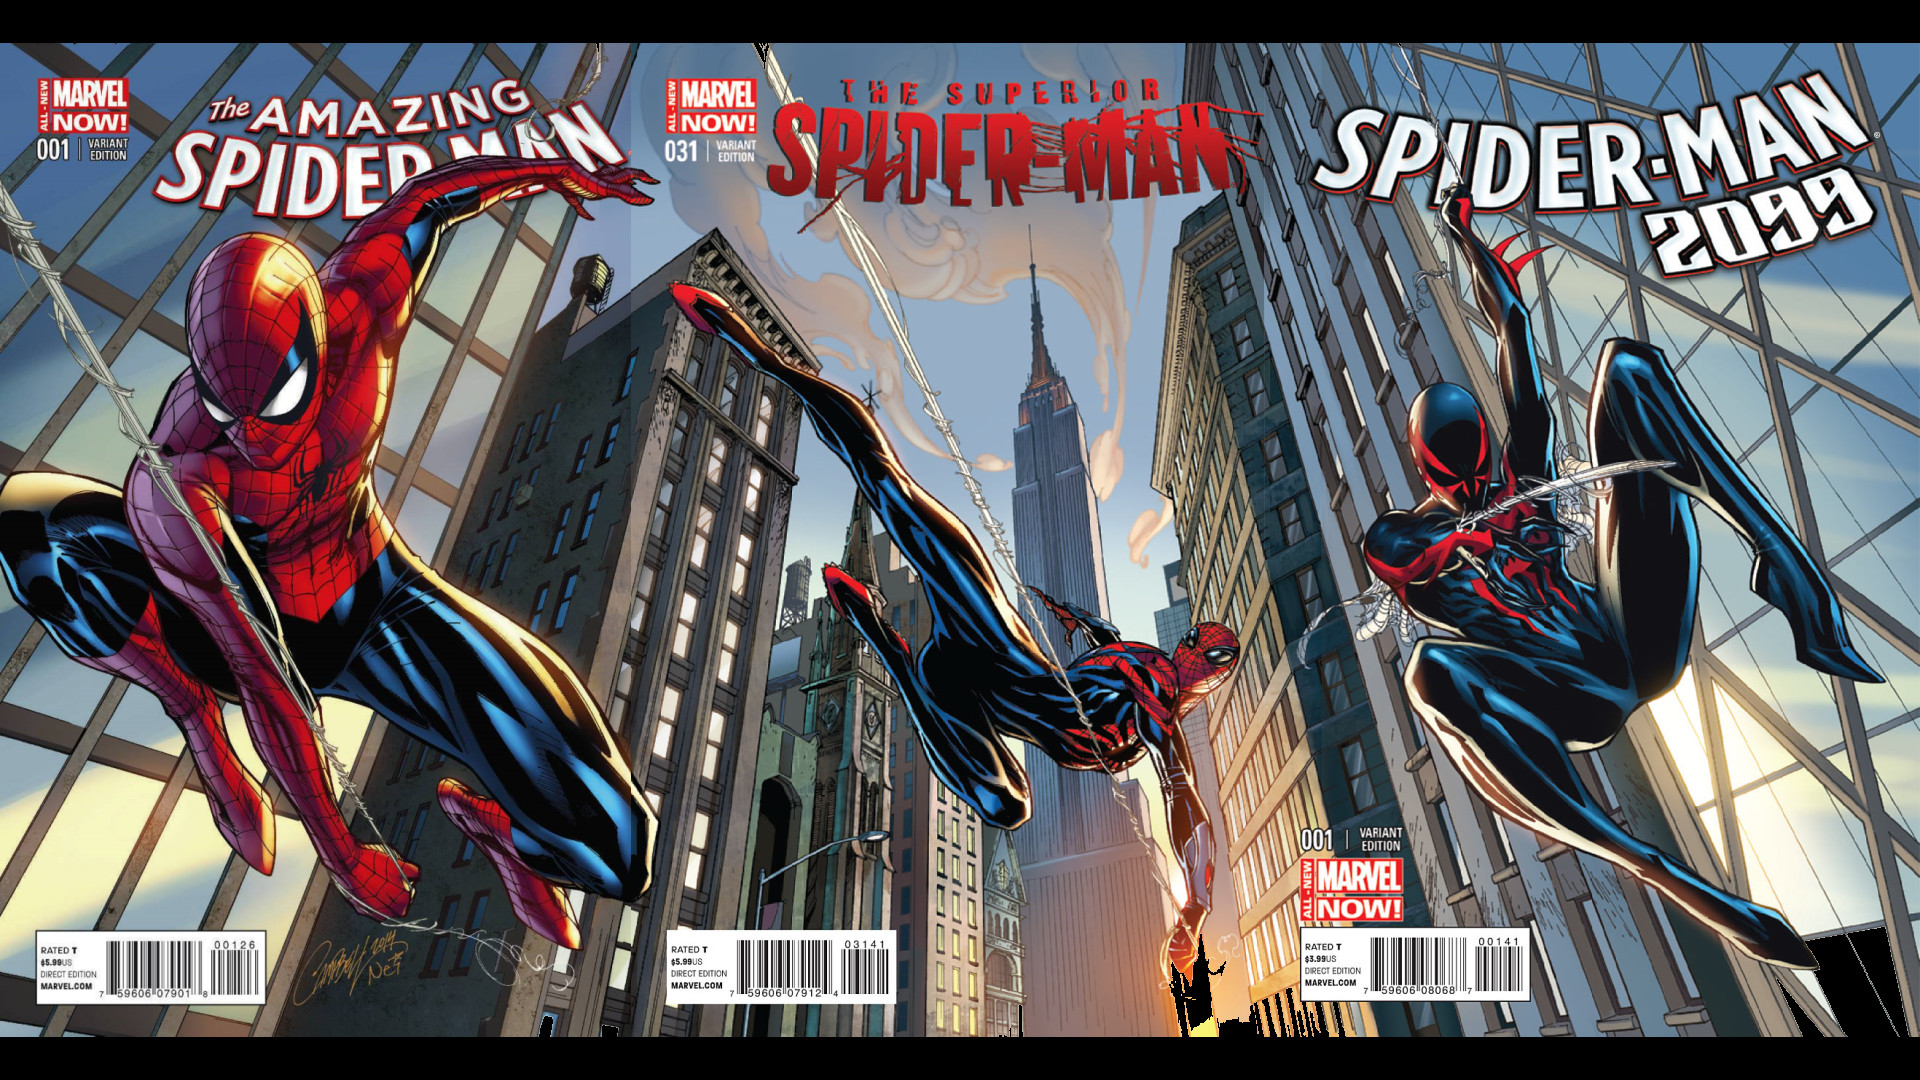 1920x1080 For those asking for a wallpaper of the Campbell Spider-Man variants.